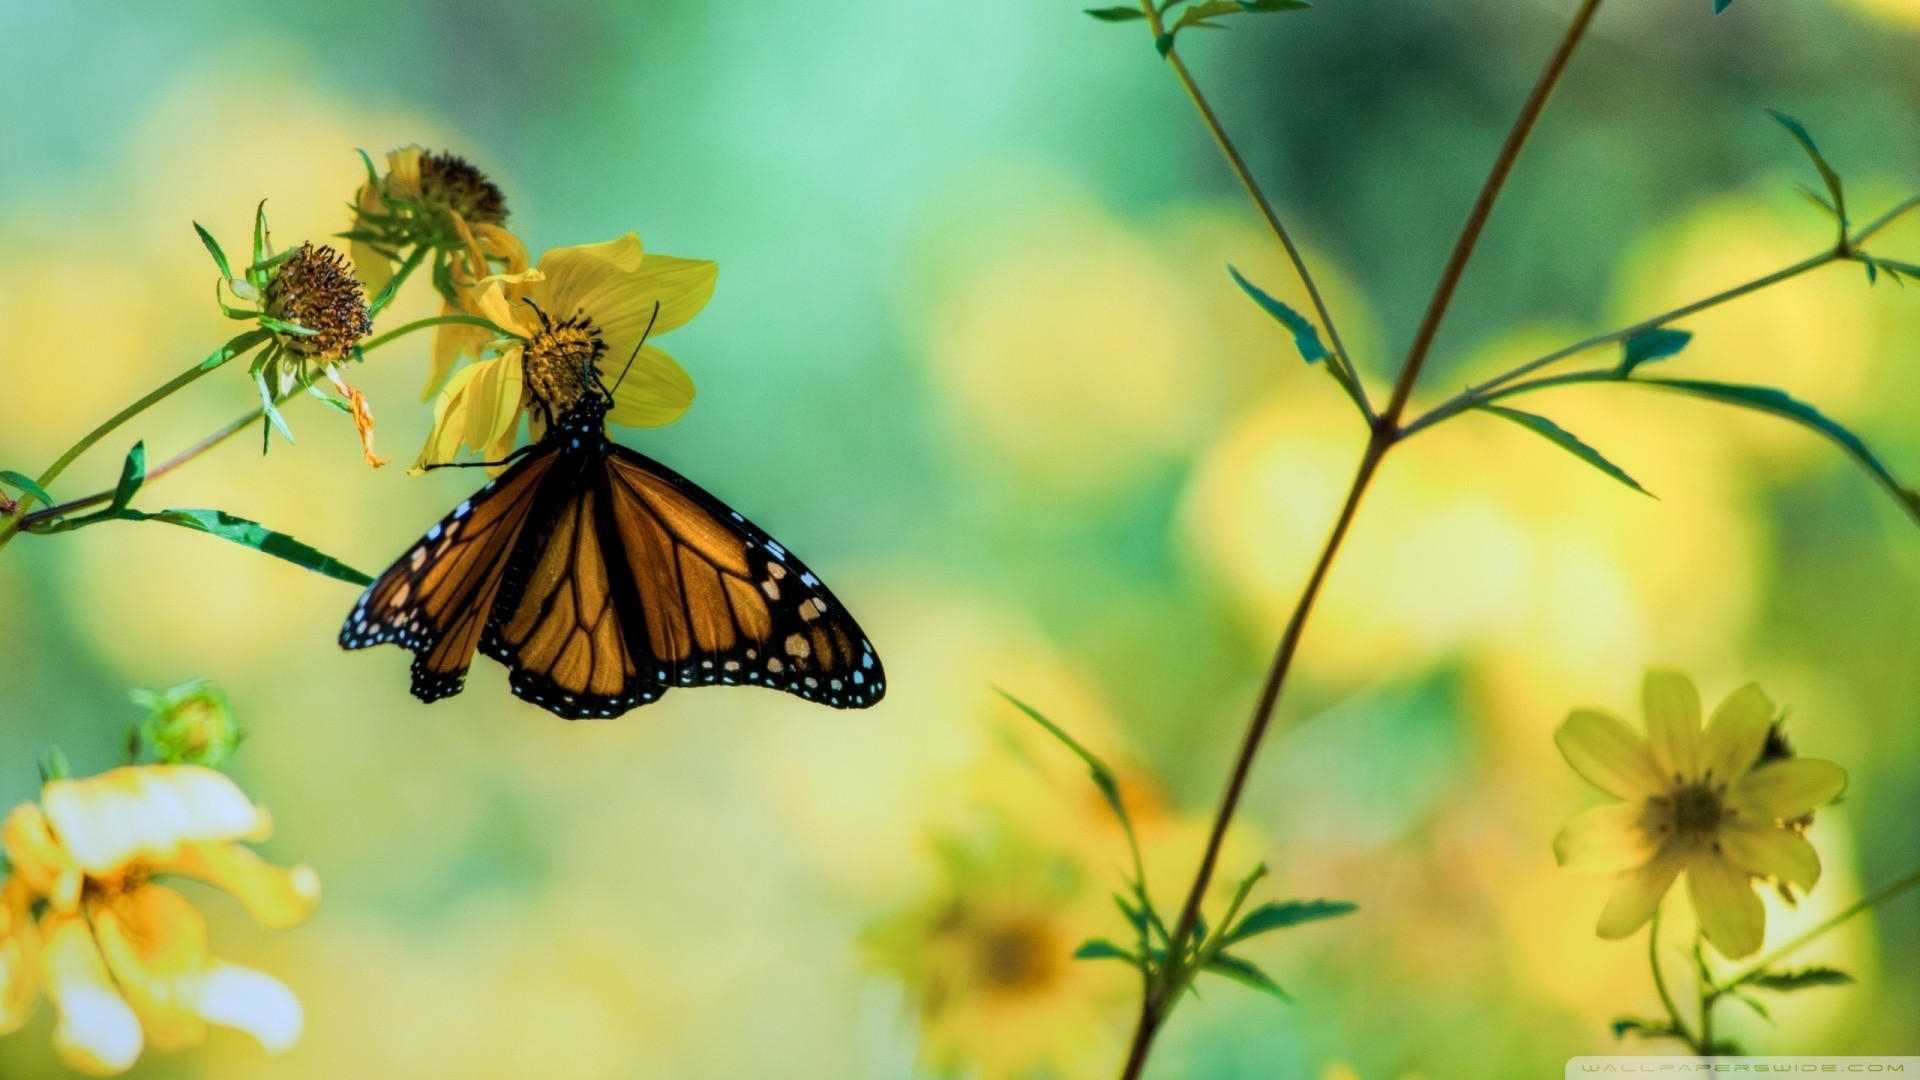 1920x1080, 30 Colorful Butterfly Wallpapers Free To - Facebook High Quality Cover - HD Wallpaper 